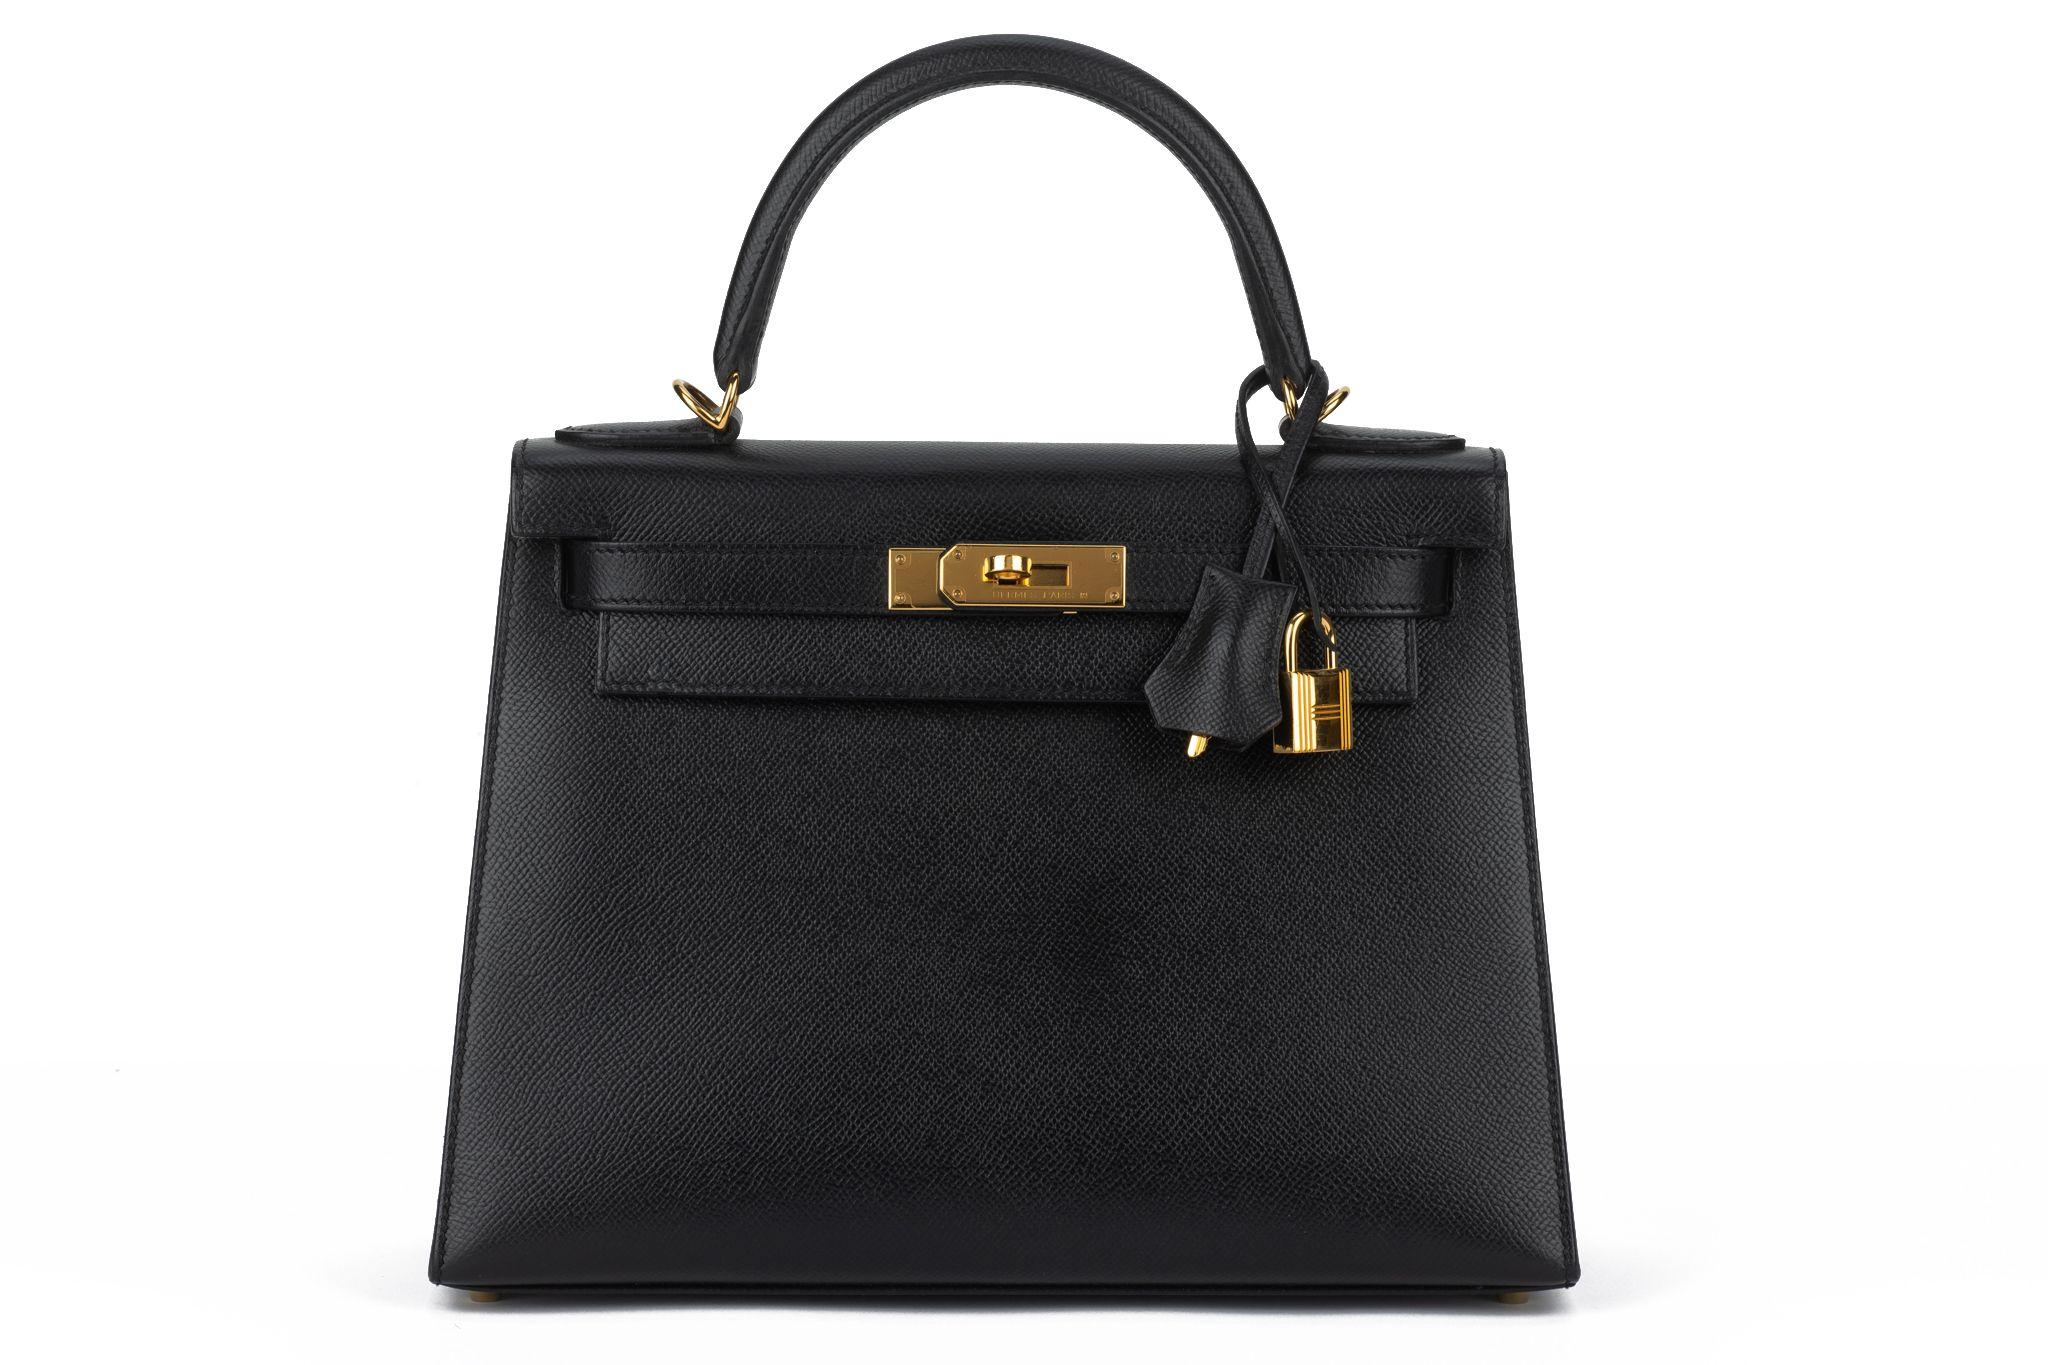 Brand new in box Hermes Kelly Bag 28 sellier black epsom leather with gold tone hardware. Date stamp A for 2017. Unused condition, plastic on hardware.
Comes with : 2 keys , lock, clochette , tirette, rain protection, original dustcover and box.